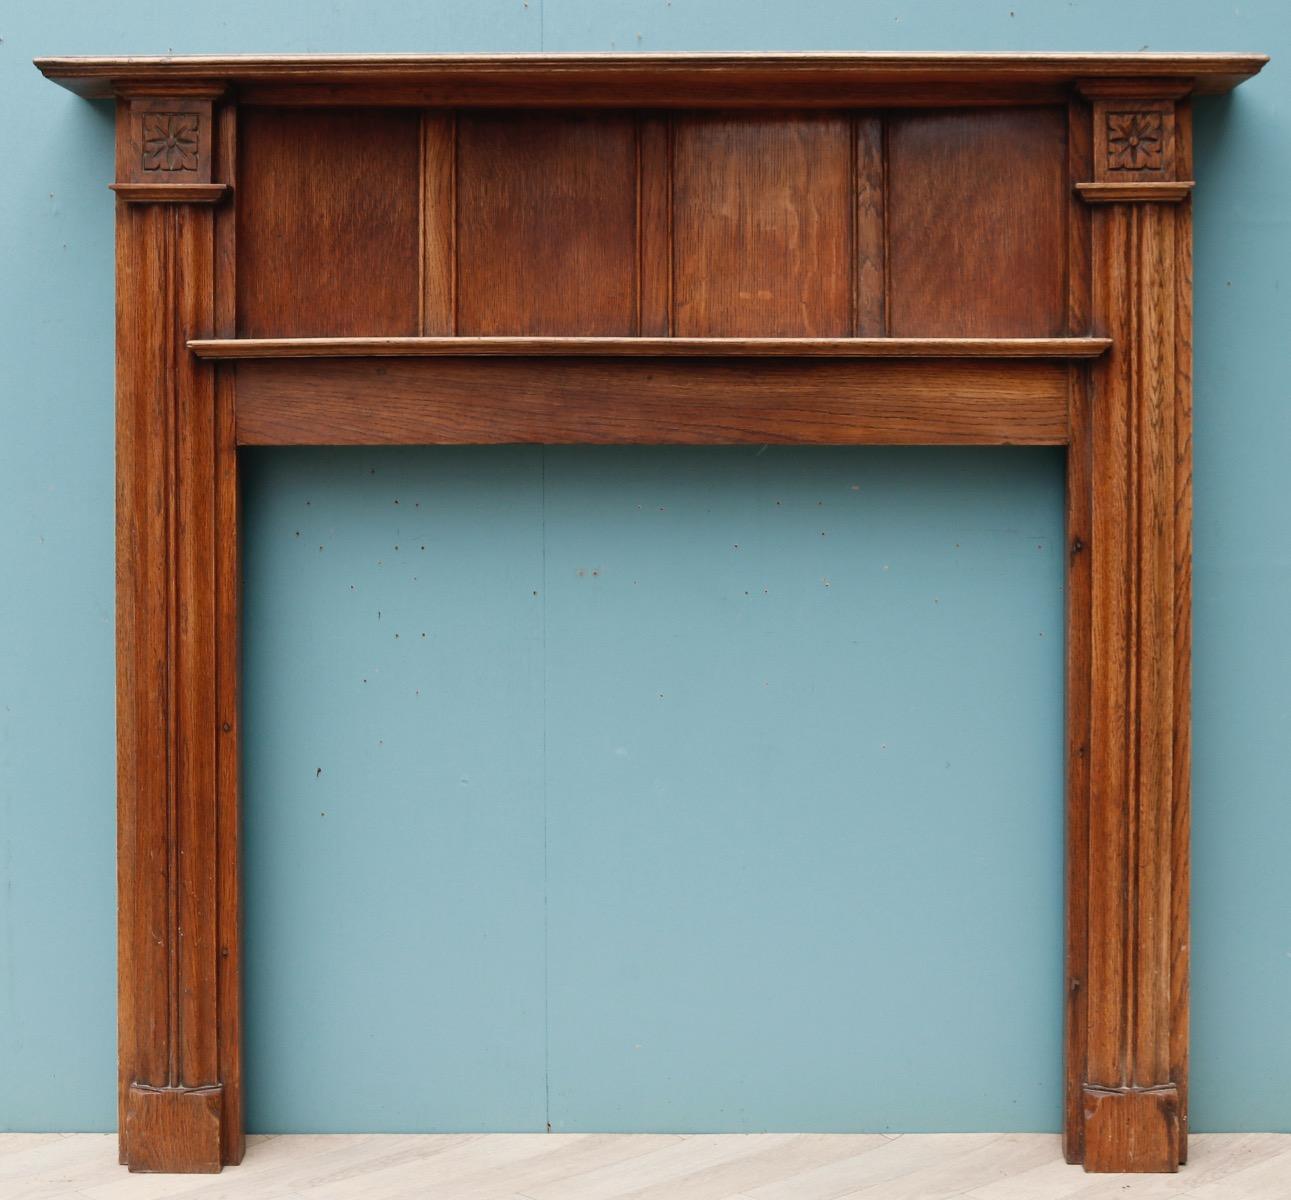 An Arts & Crafts style fire surround constructed using traditional methods. The frieze is slightly concave in shape.

Additional Dimensions 

Opening Height 83.5 cm

Opening Width 96 cm

Width between outsides of the foot blocks 125 cm.